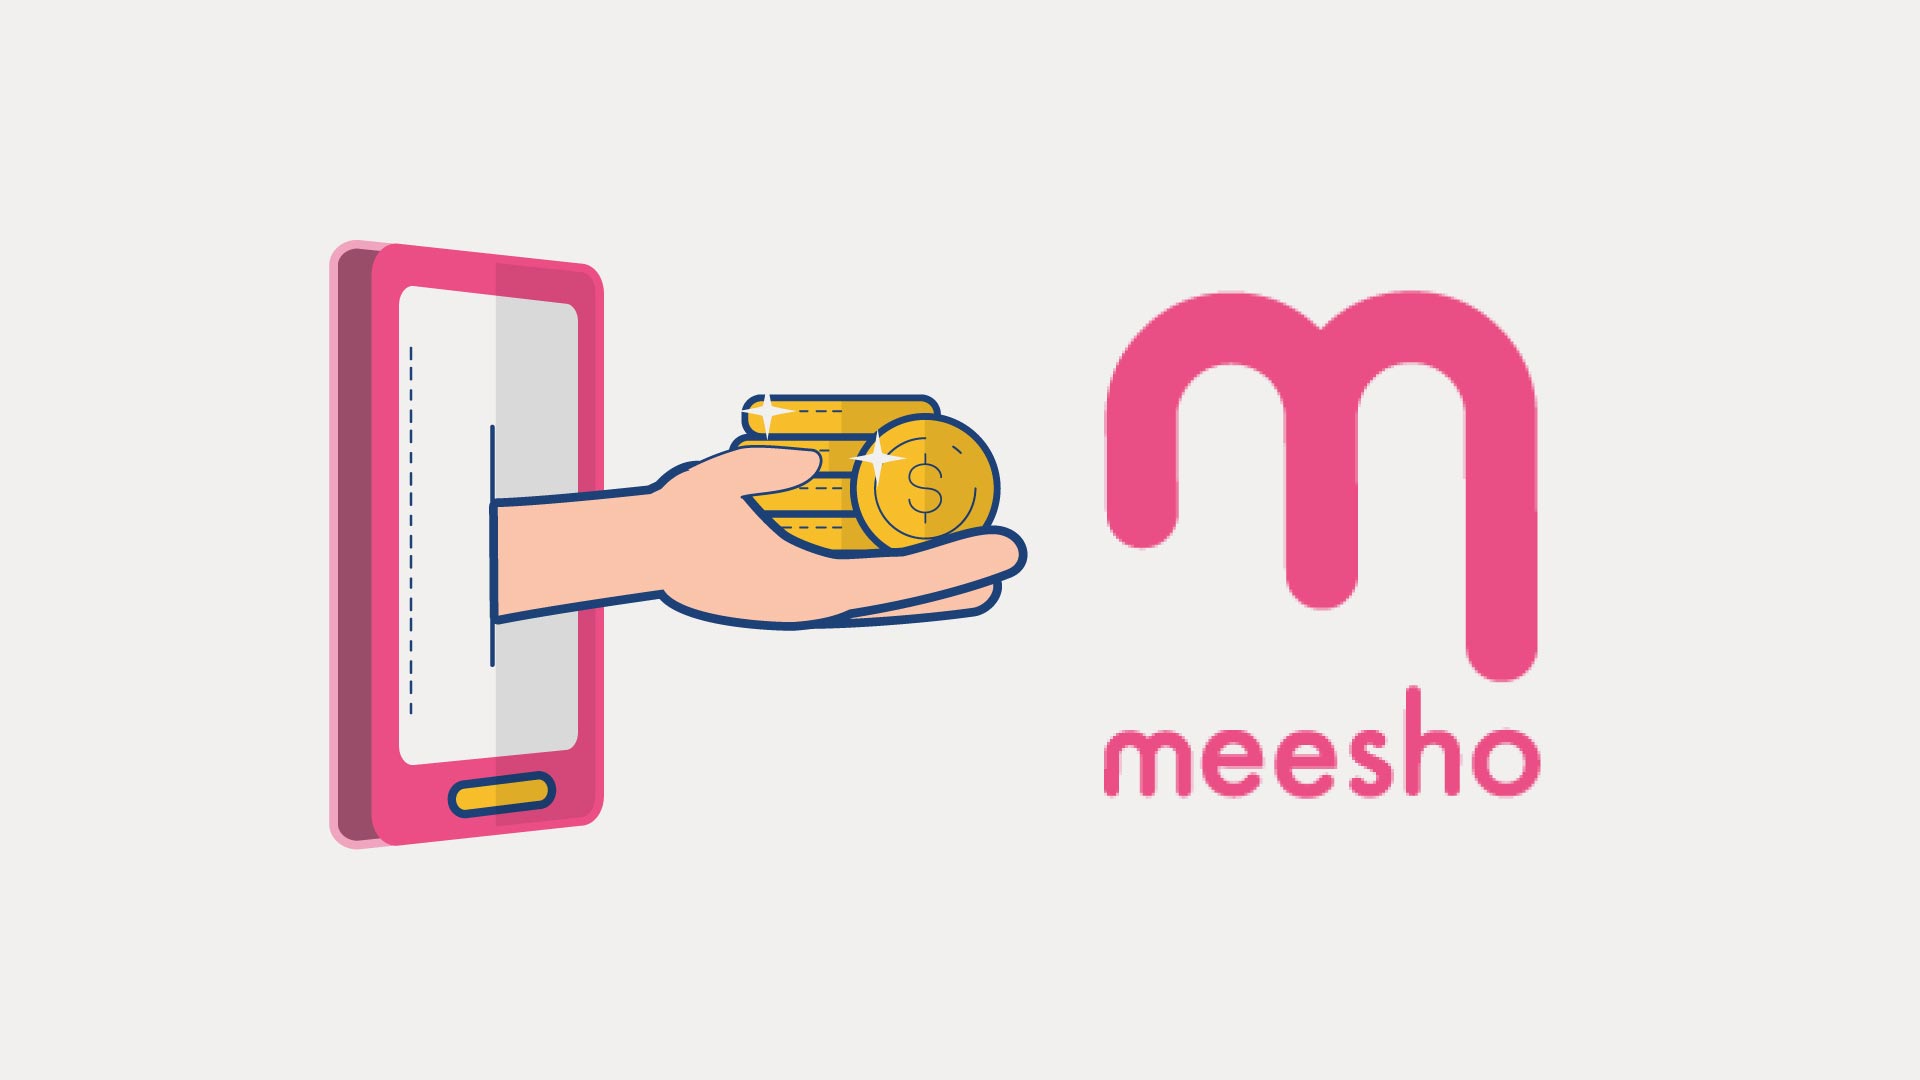 A Short Analysis and Summary on Meesho